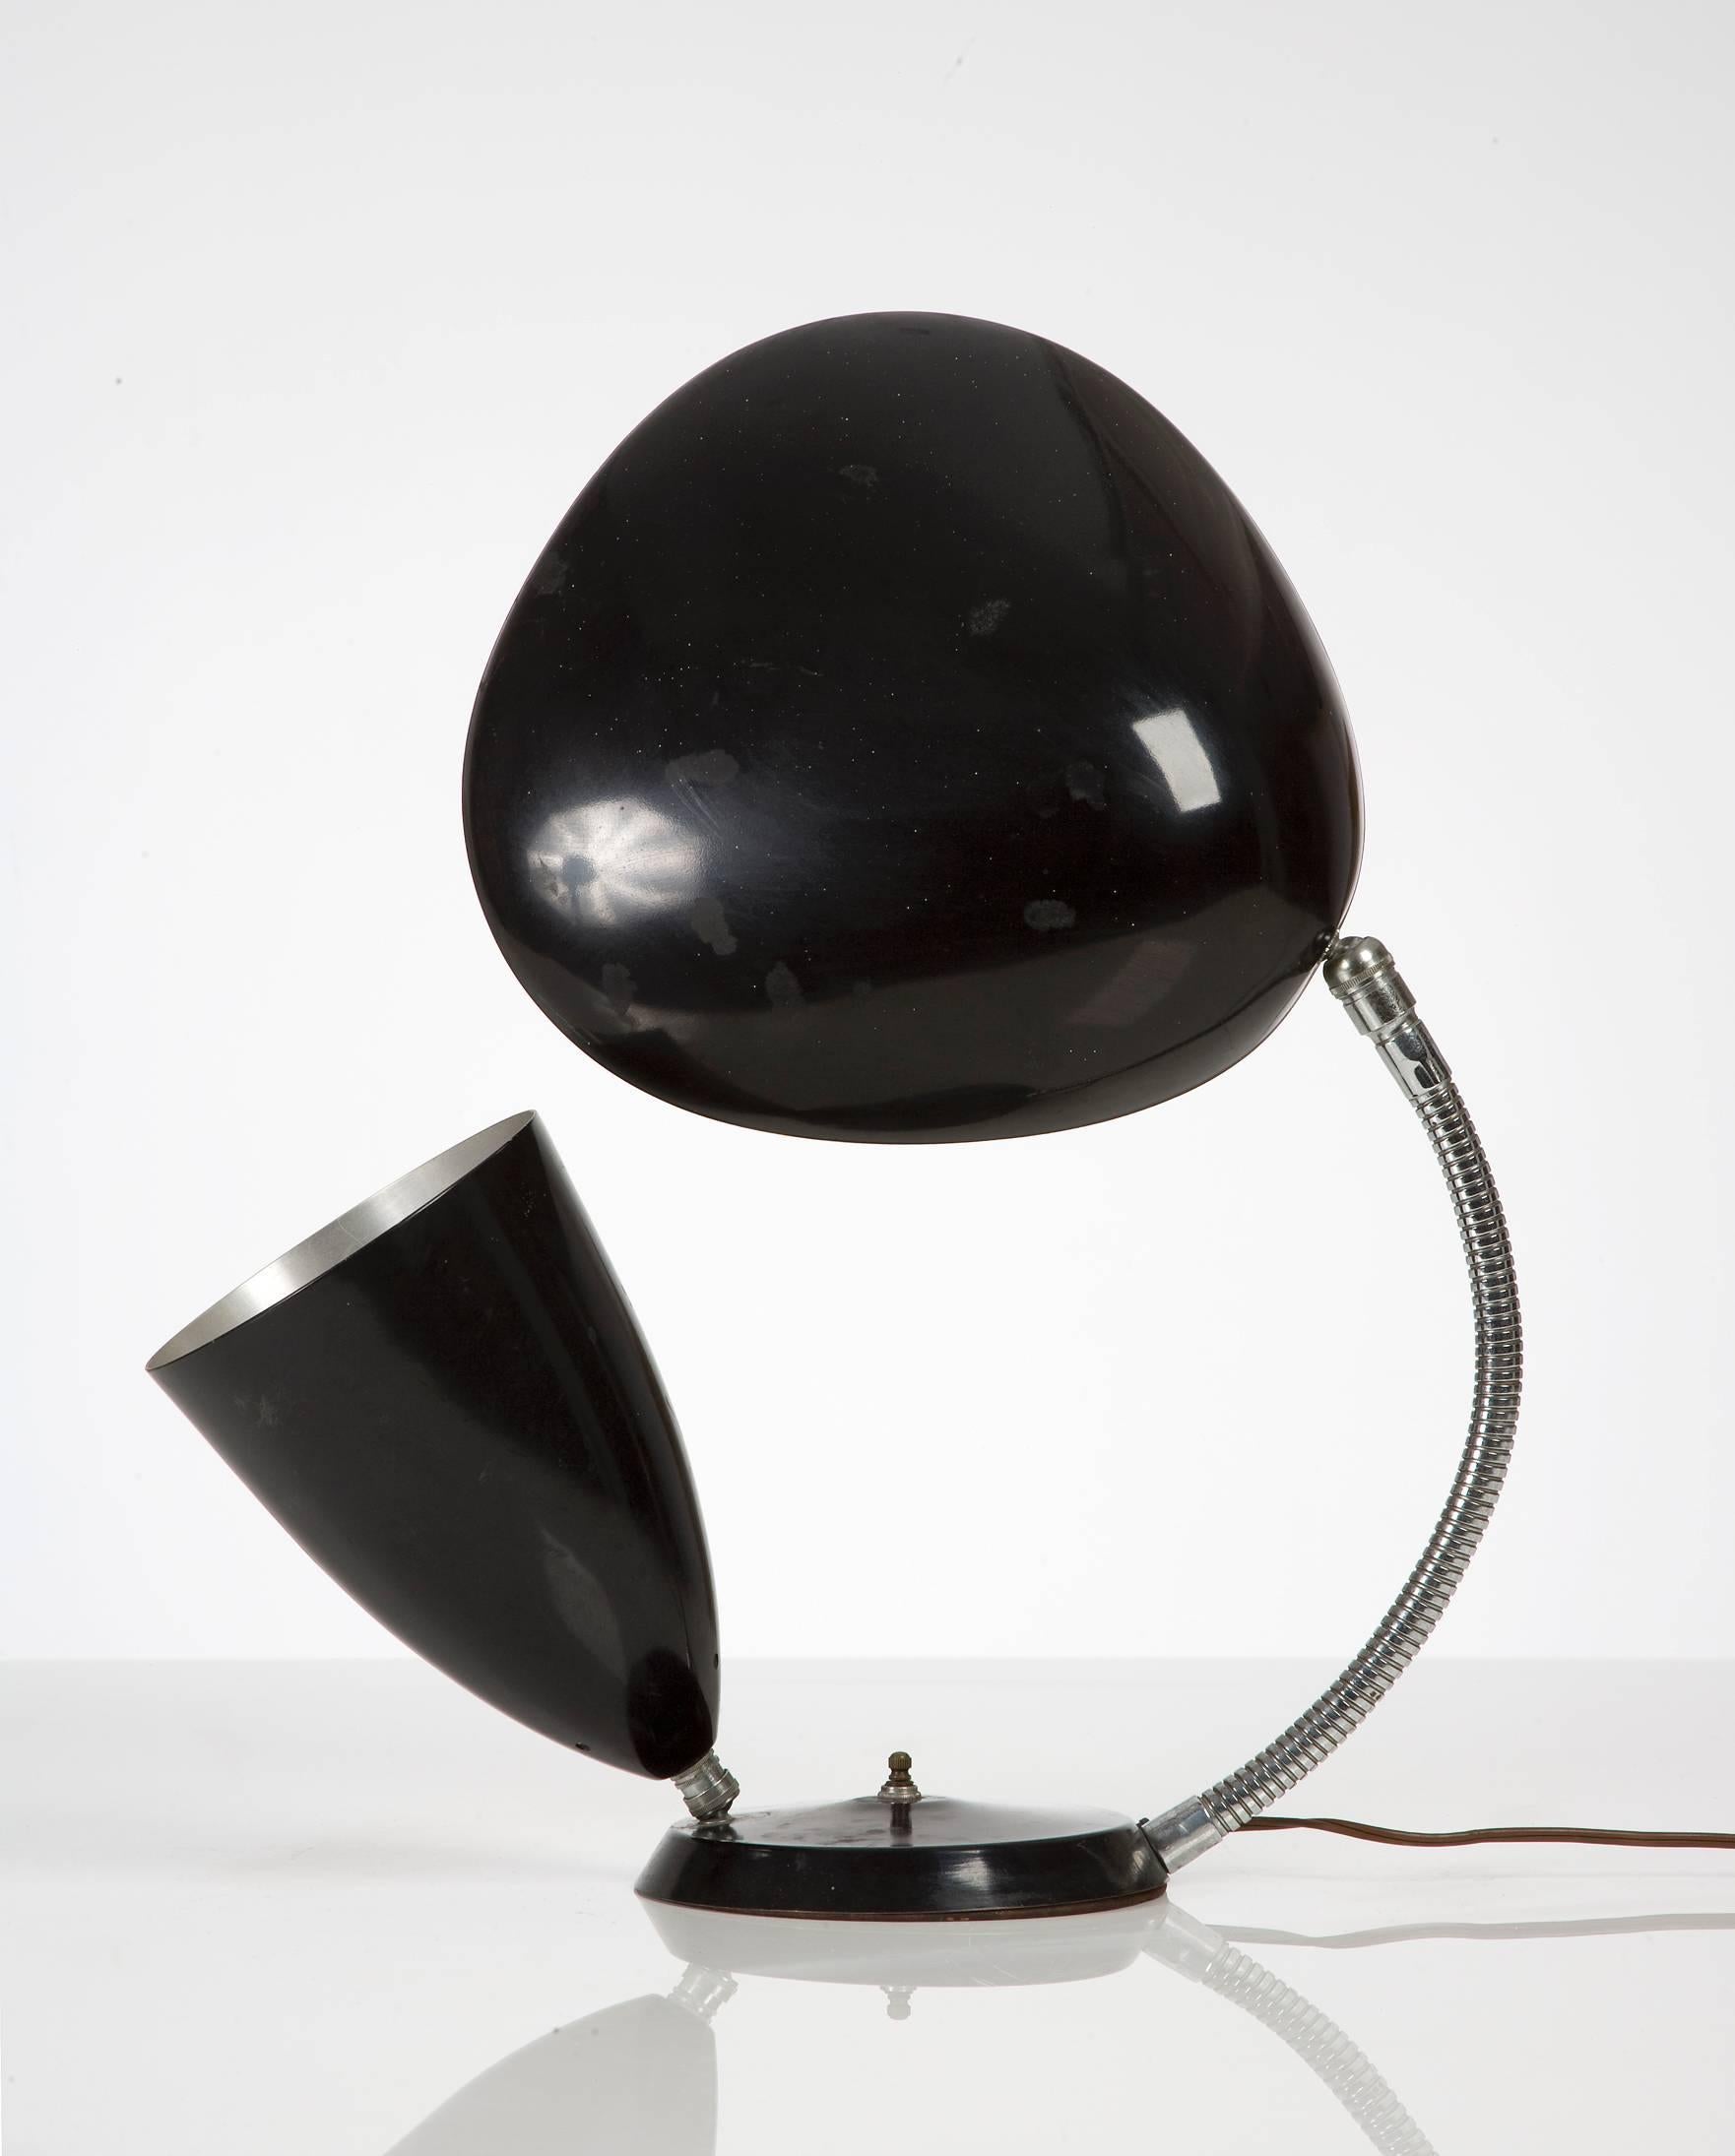 Table lamp in black enameled aluminum on a chrome-plated steel base with one cone shade and one 